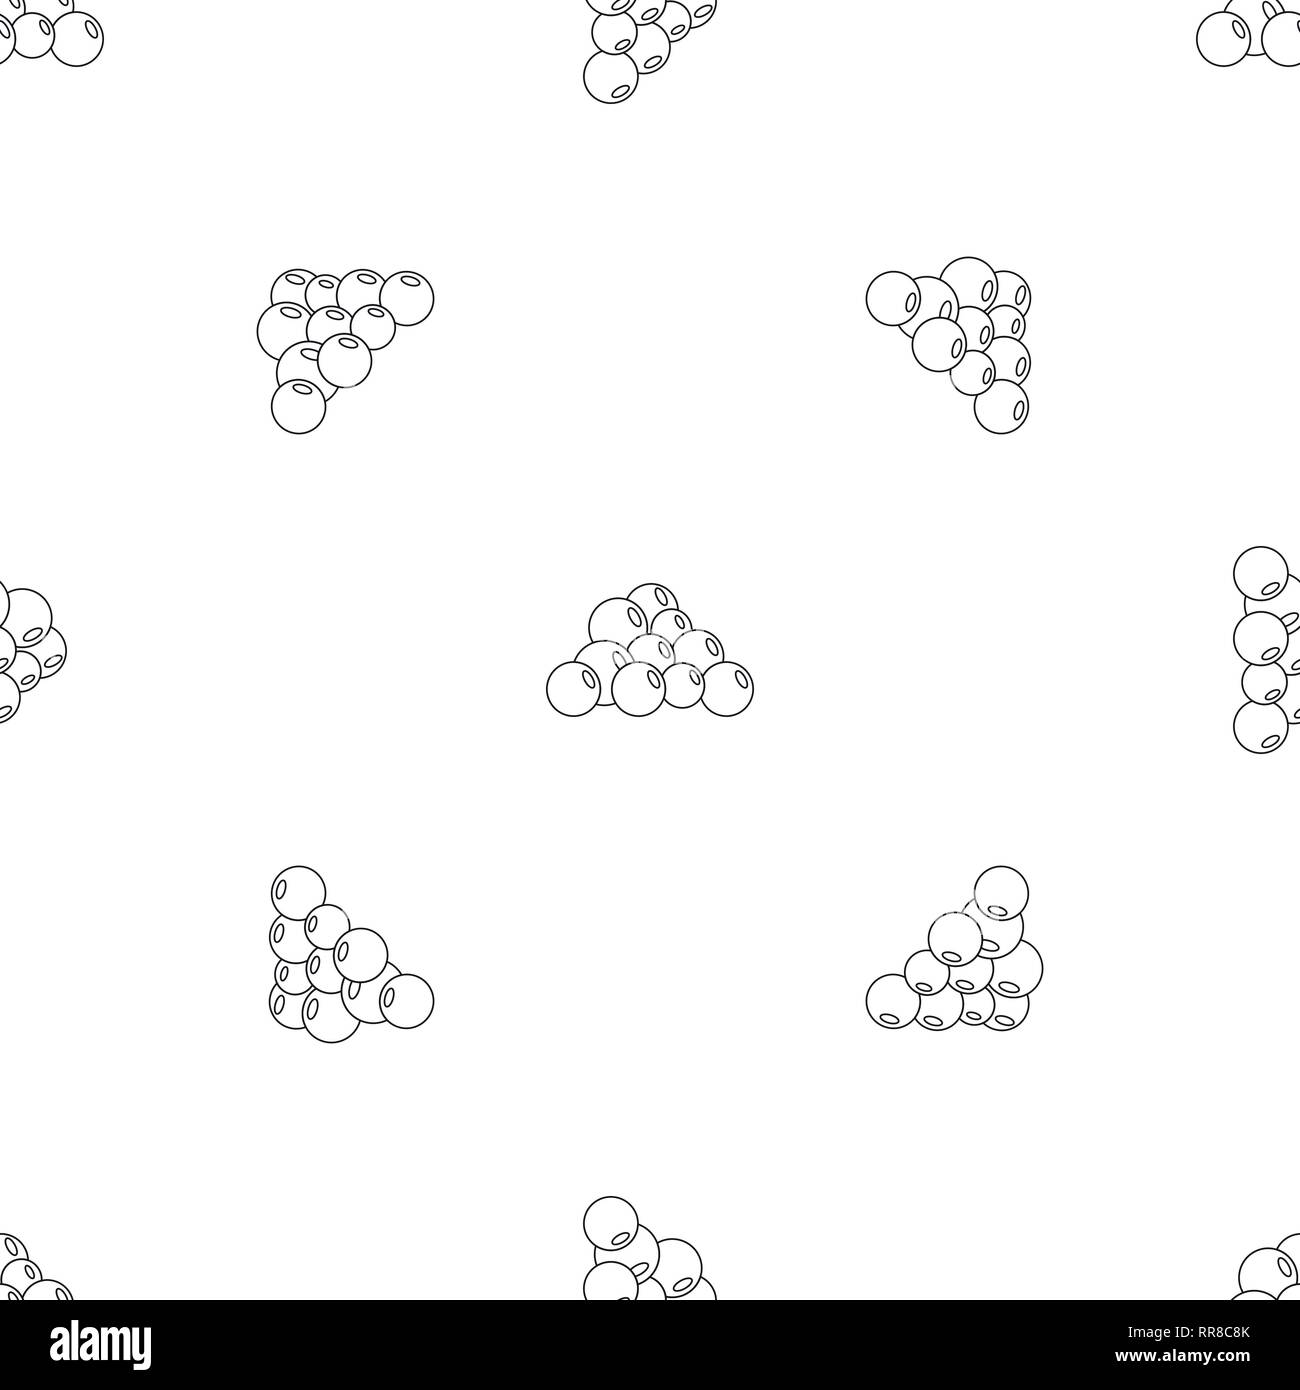 Mustard seed pattern seamless vector repeat geometric for any web design Stock Vector